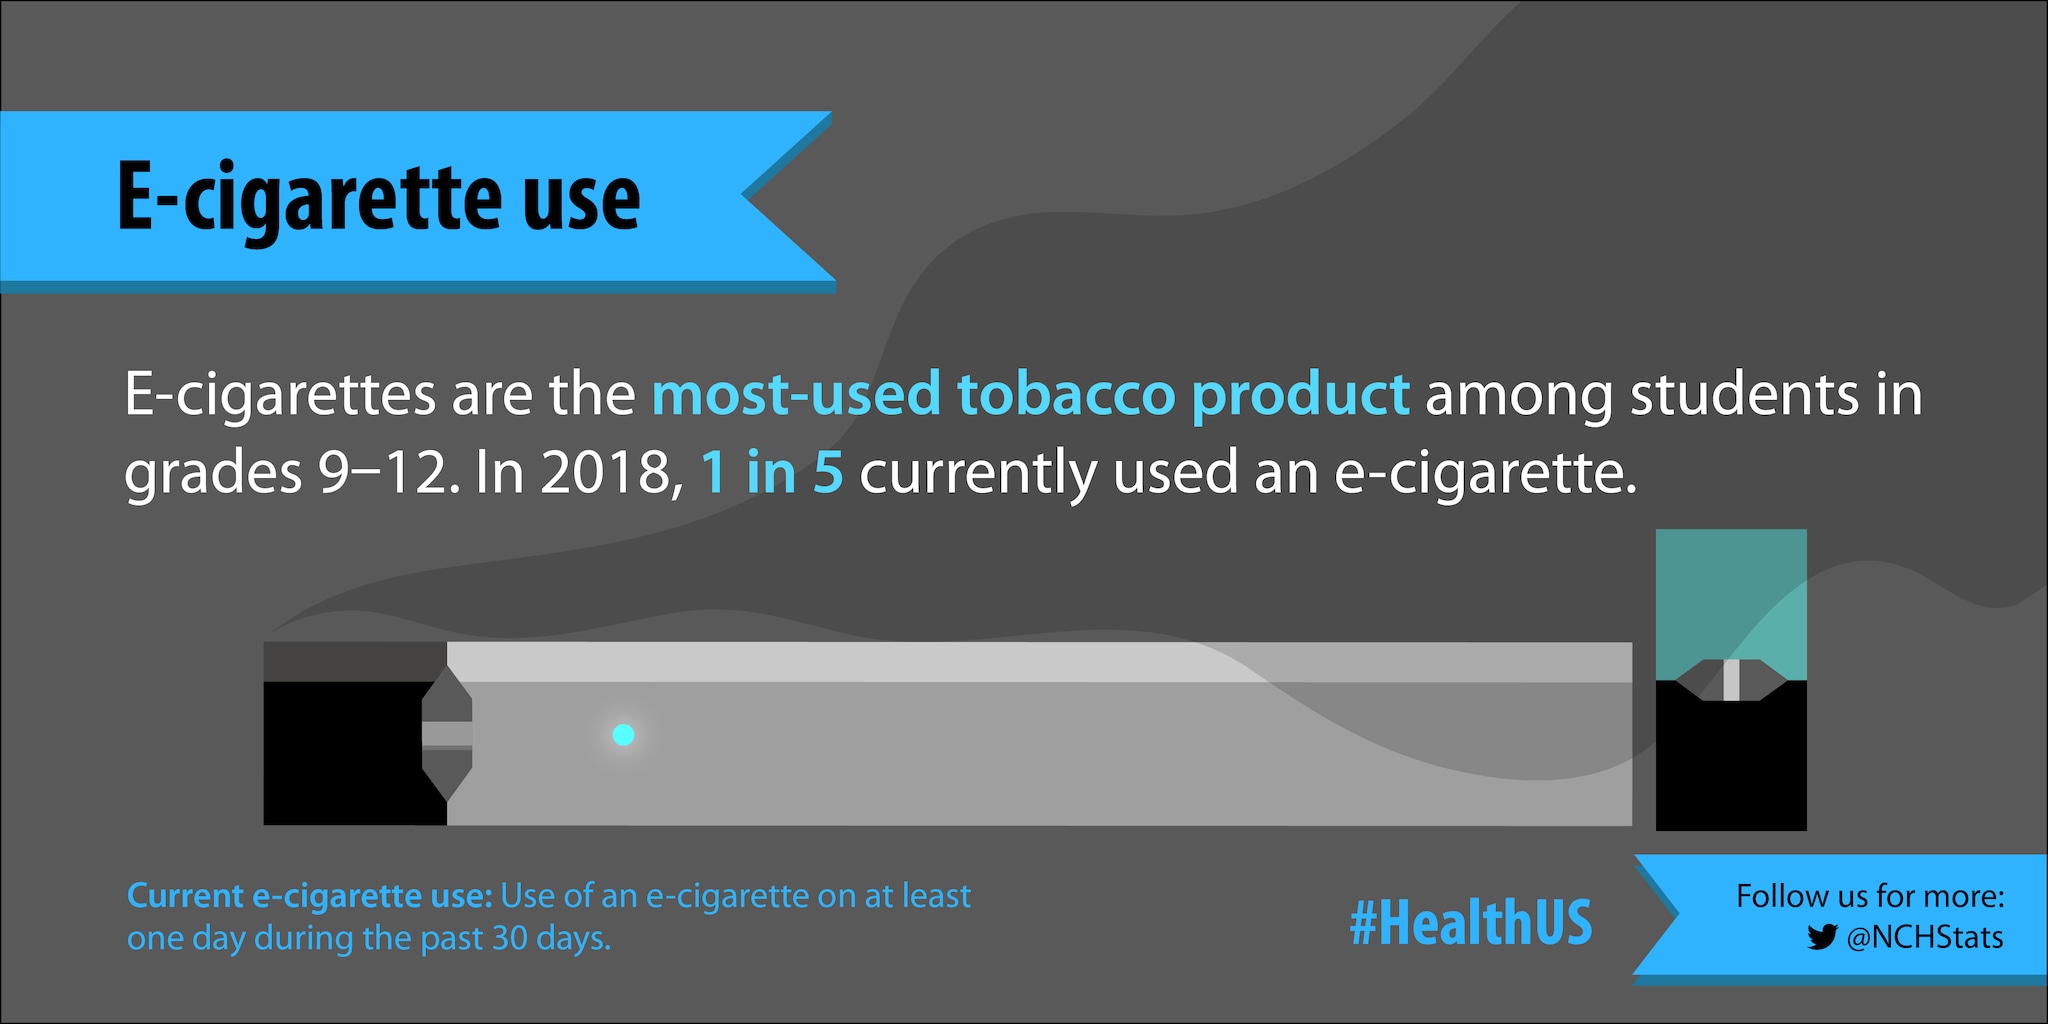 E-cigarettes are the most-used tobacco product among students in grades 9-12. In 2018, 1 in 5 currently used an e-cigarette.